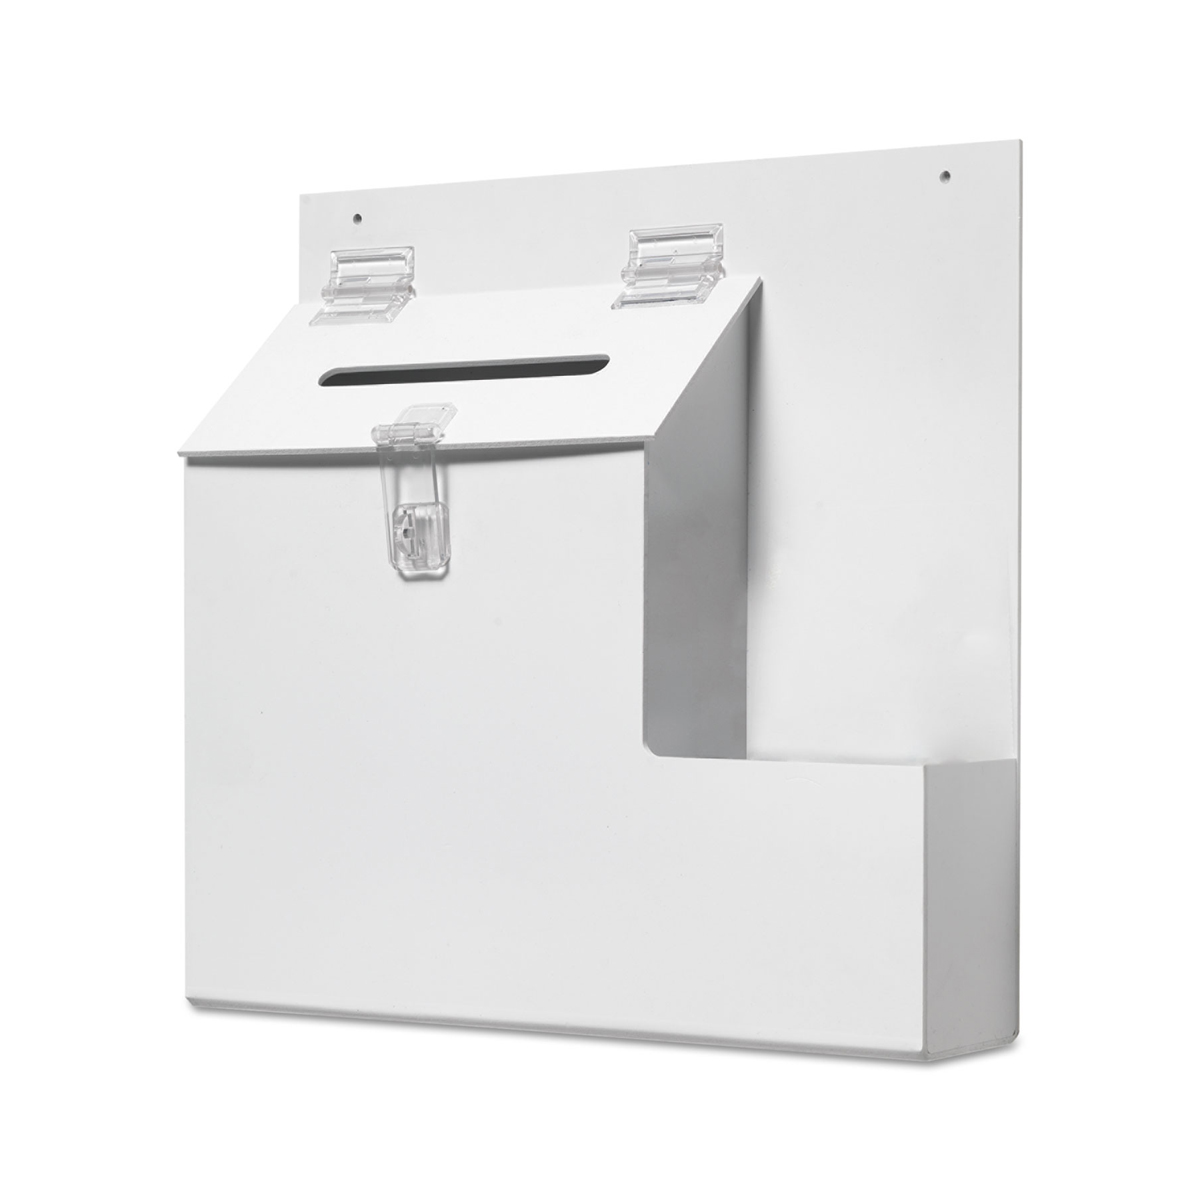 Deflecto Suggestion Box - External Dimensions: 13.8" Width x 3.6" Depth x 13" Height - Key Lock Closure - Plastic - White - For 